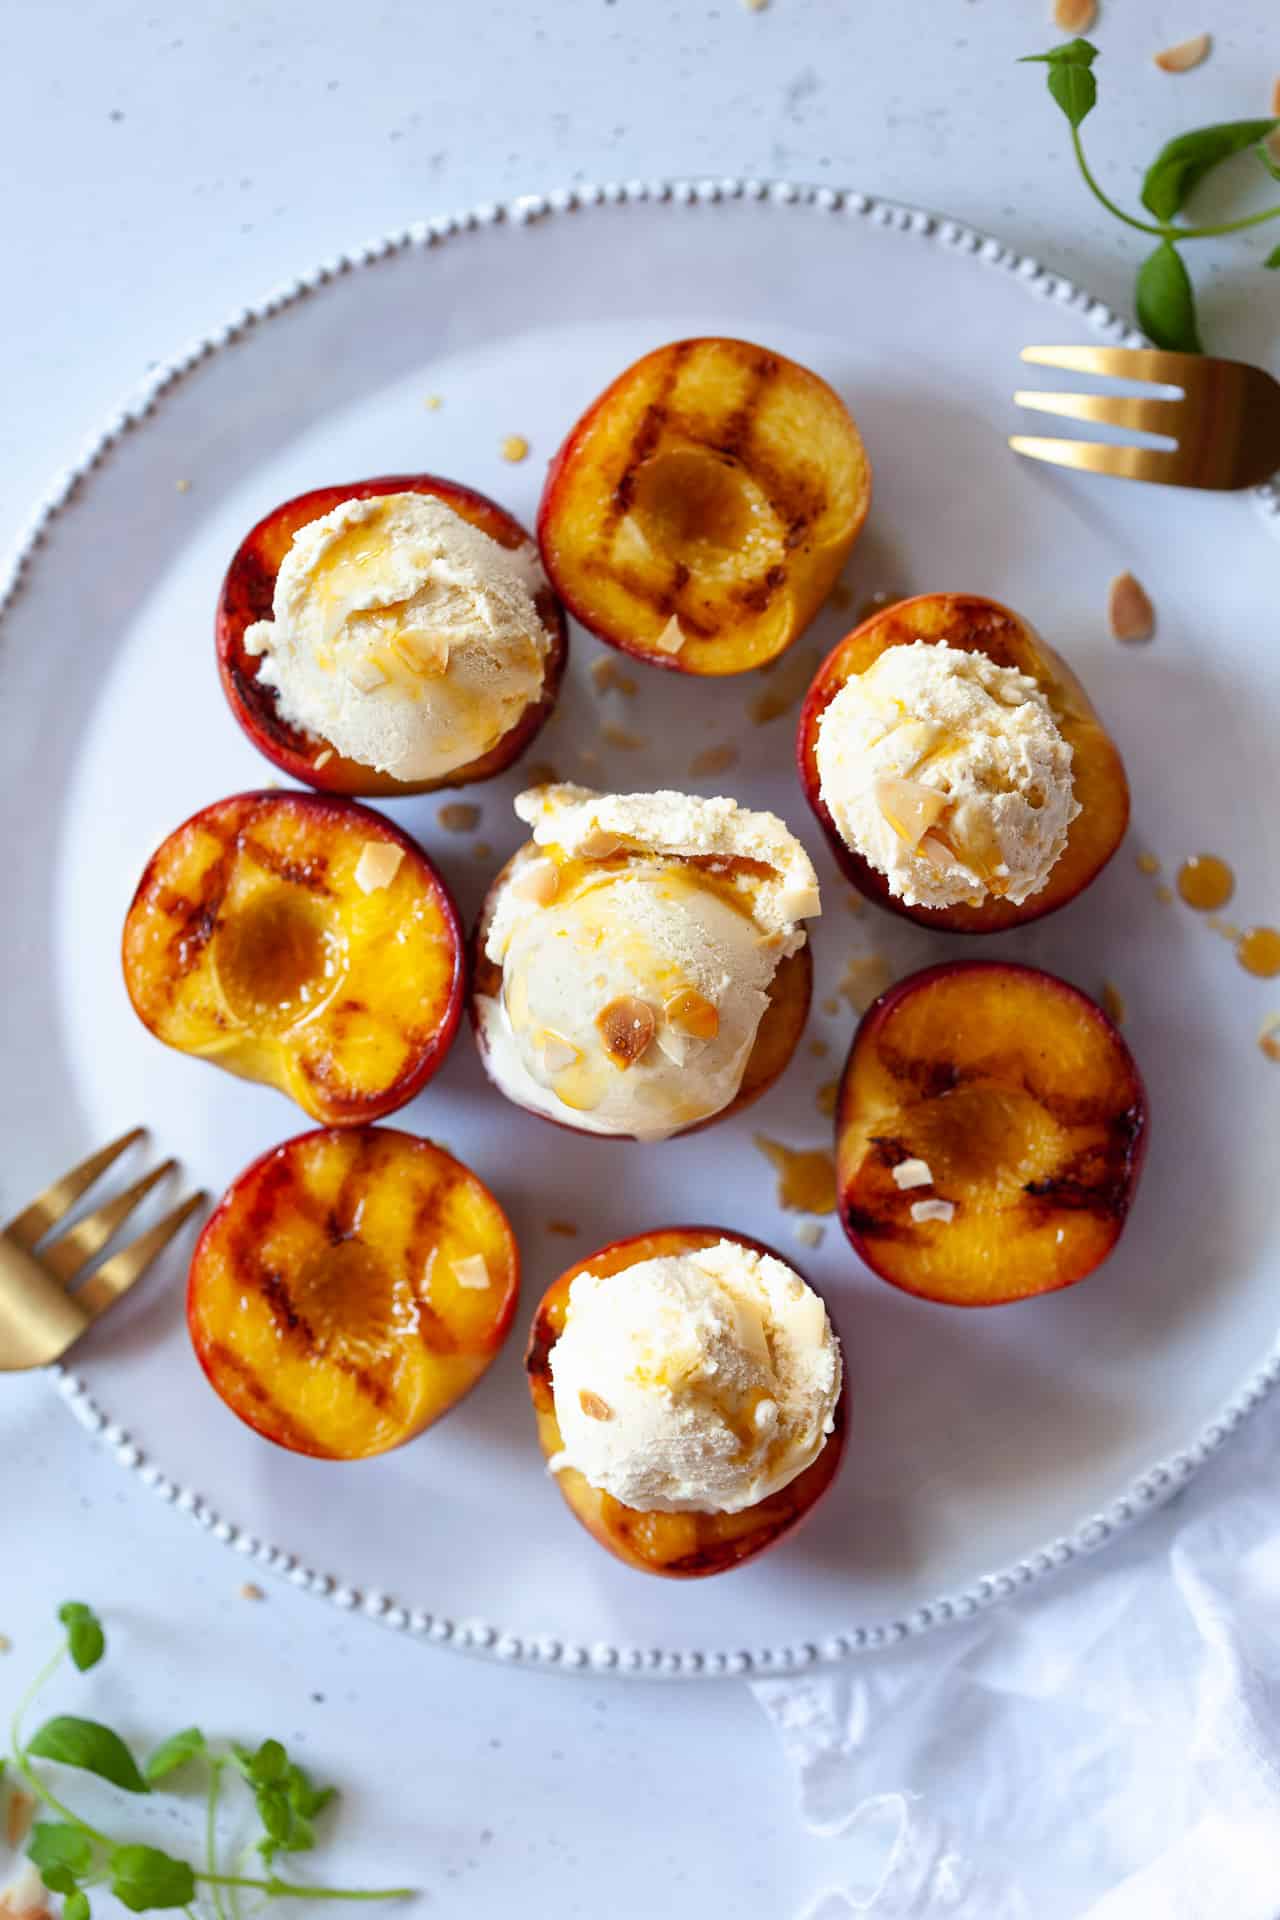 Grilled peaches with Ice Cream